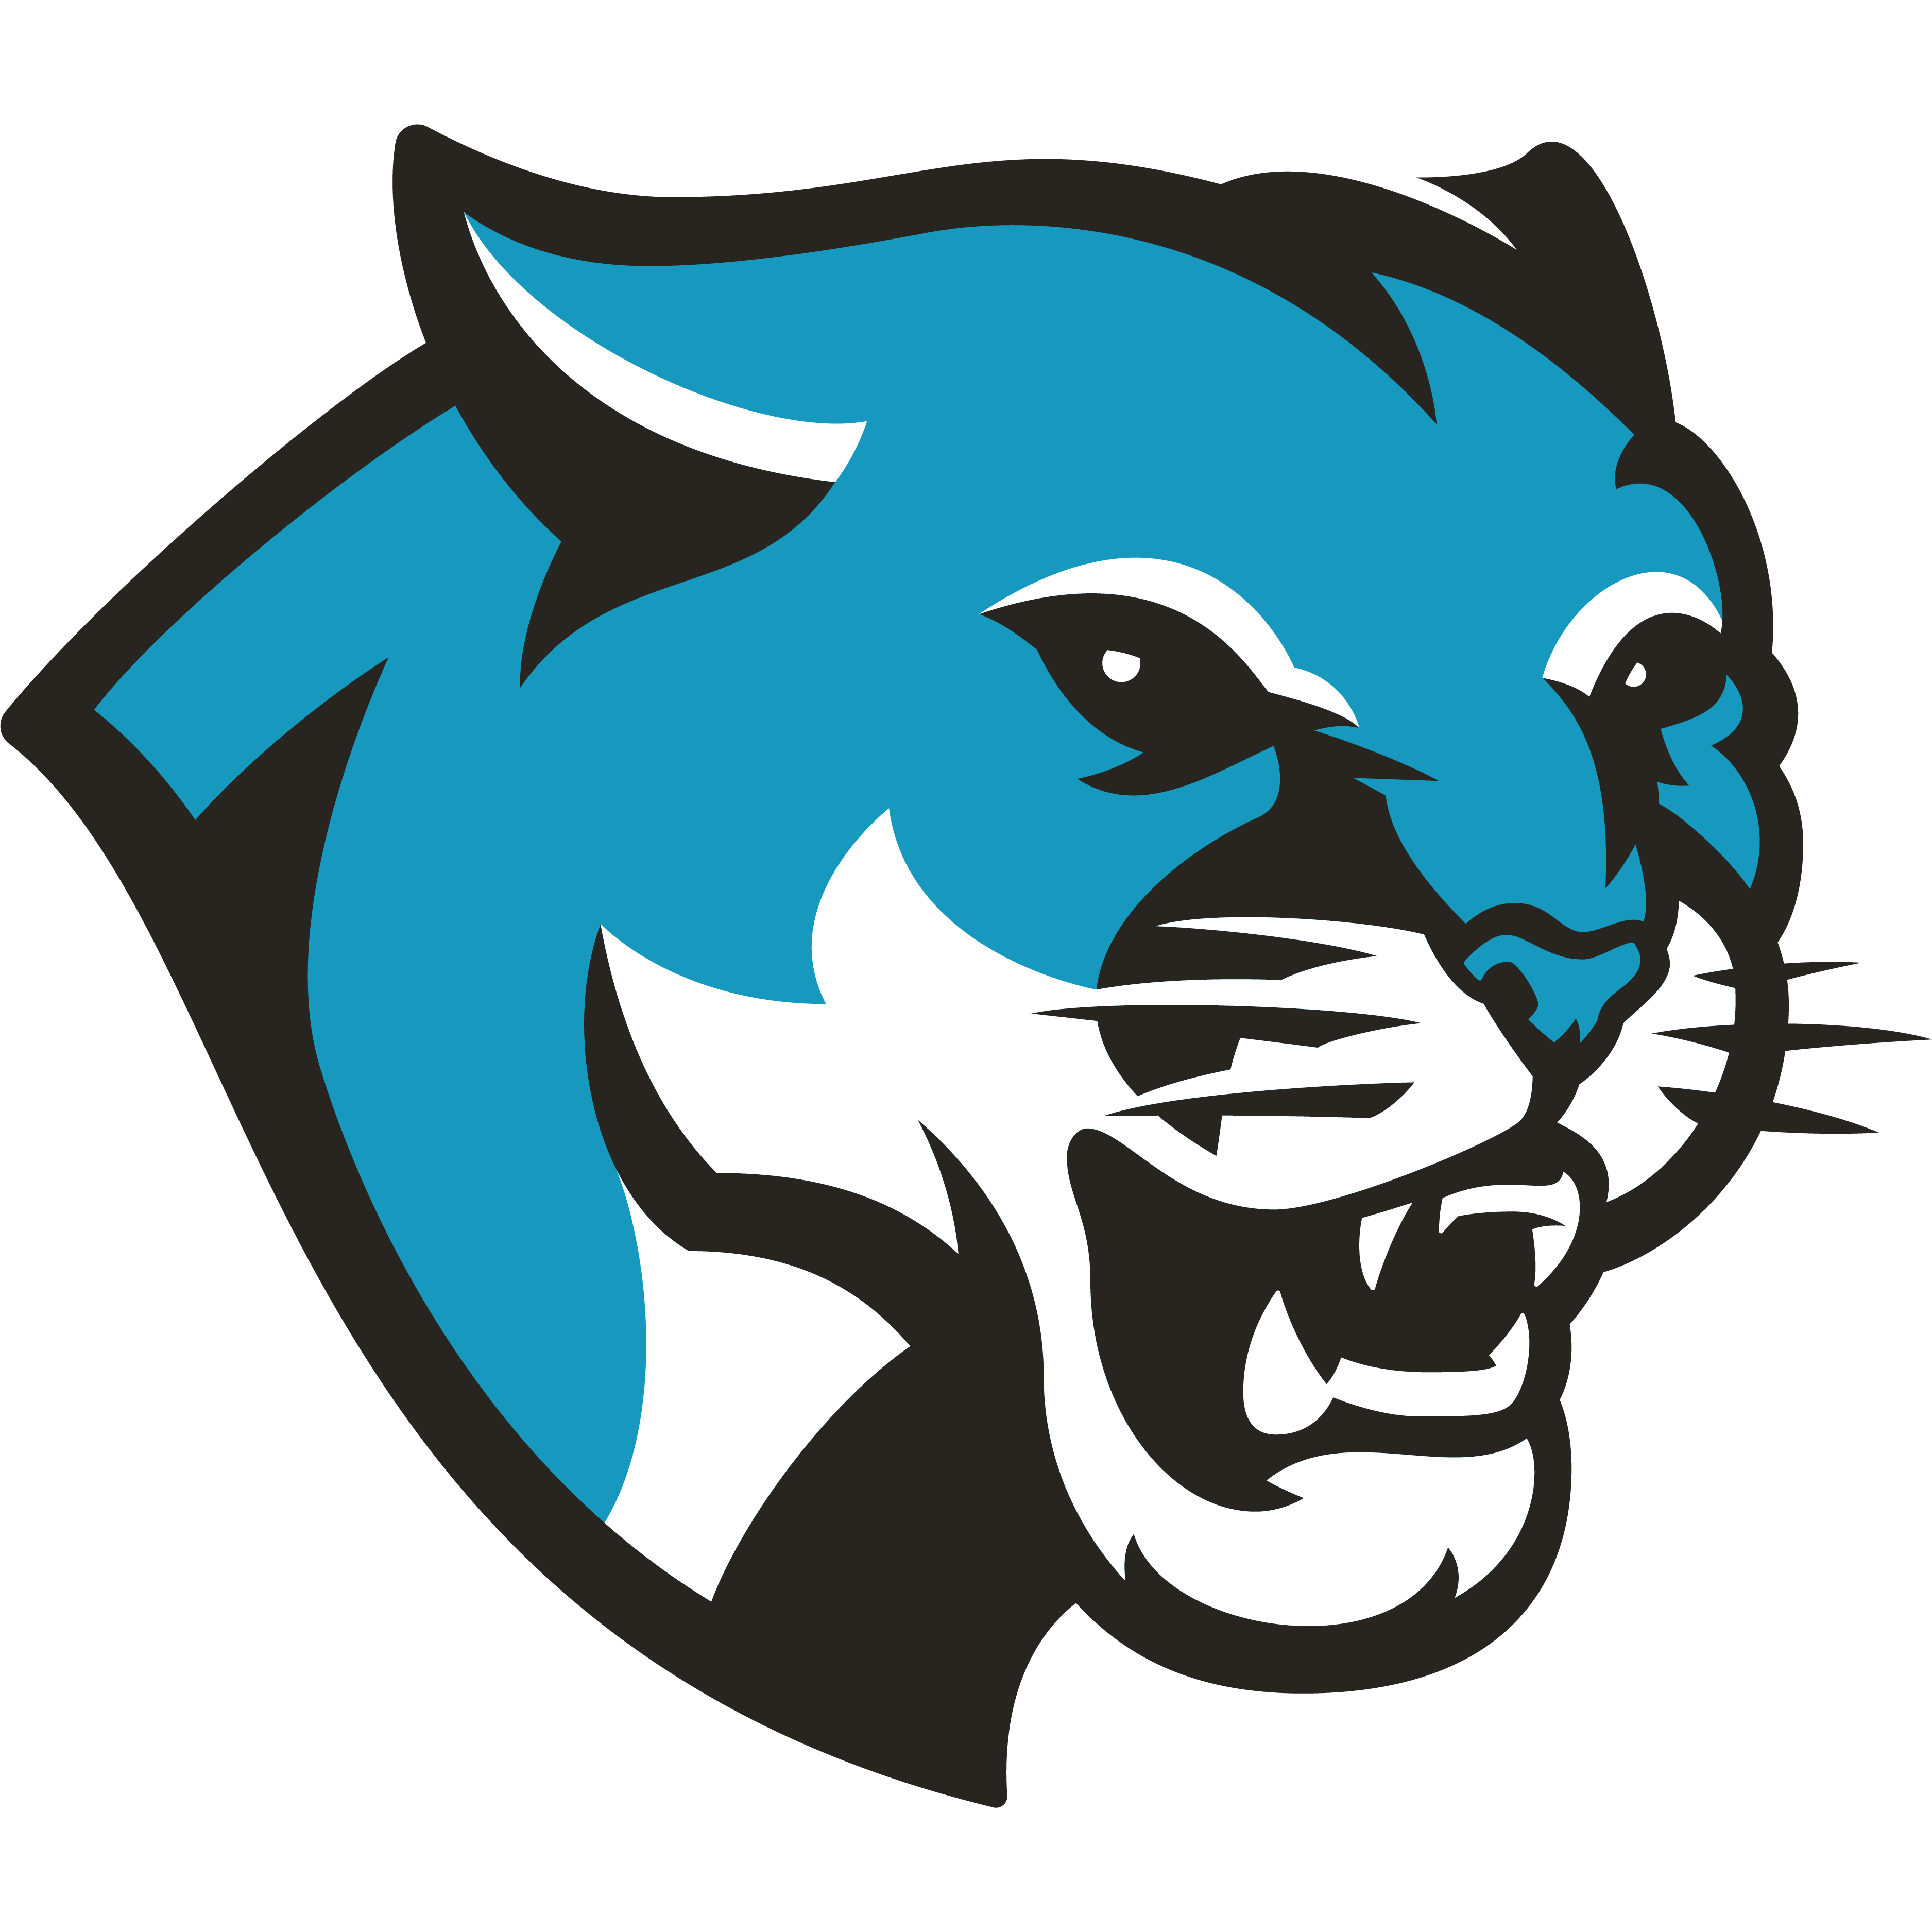 Cooper Cougars logo design by logo designer Randall Dunson for your inspiration and for the worlds largest logo competition